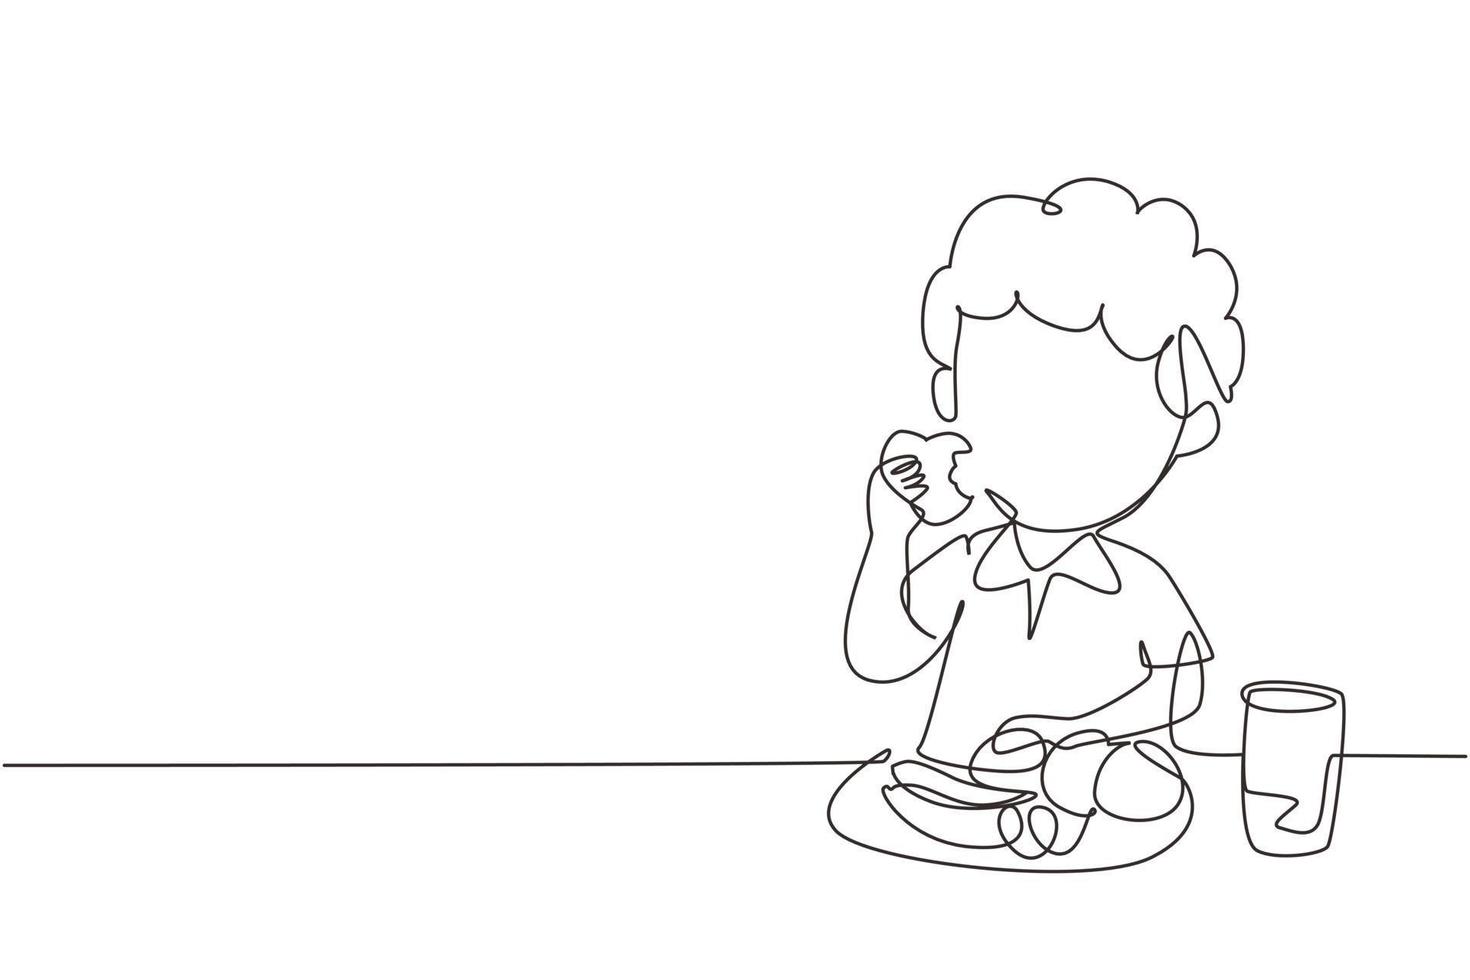 Single one line drawing boy eating fruit. Sitting at table eating apple. Watermelon and banana in tray placed on table at home. Healthy food for kids. Modern continuous line draw design graphic vector